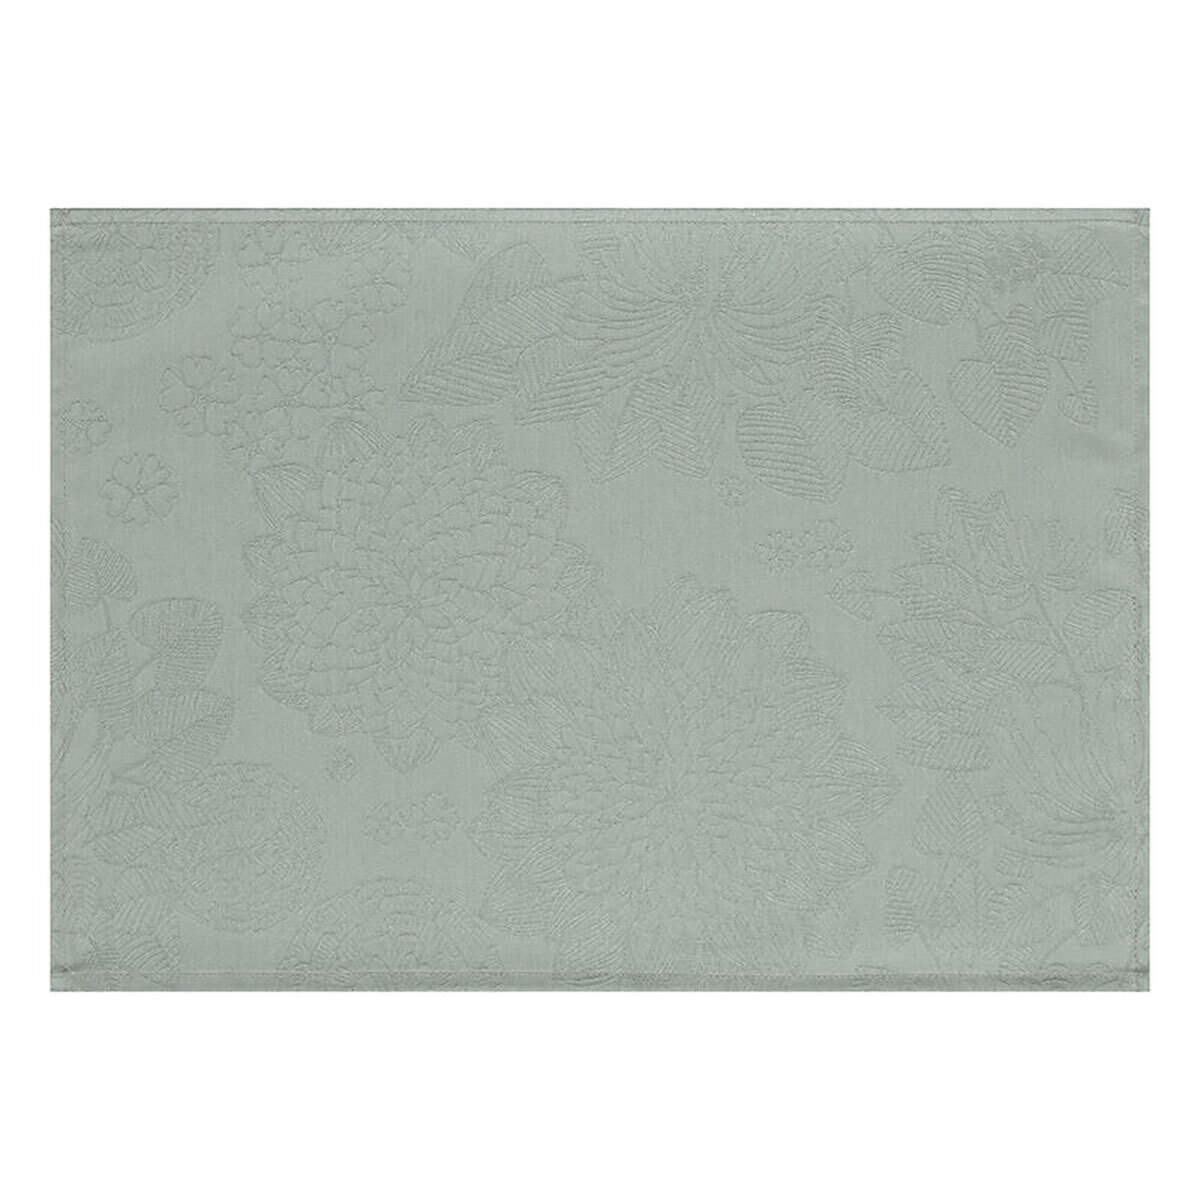 Le Jacquard Francais Marie-Galante Grey Coated Placemat 21 x 15 Inch 28447 Set of 4